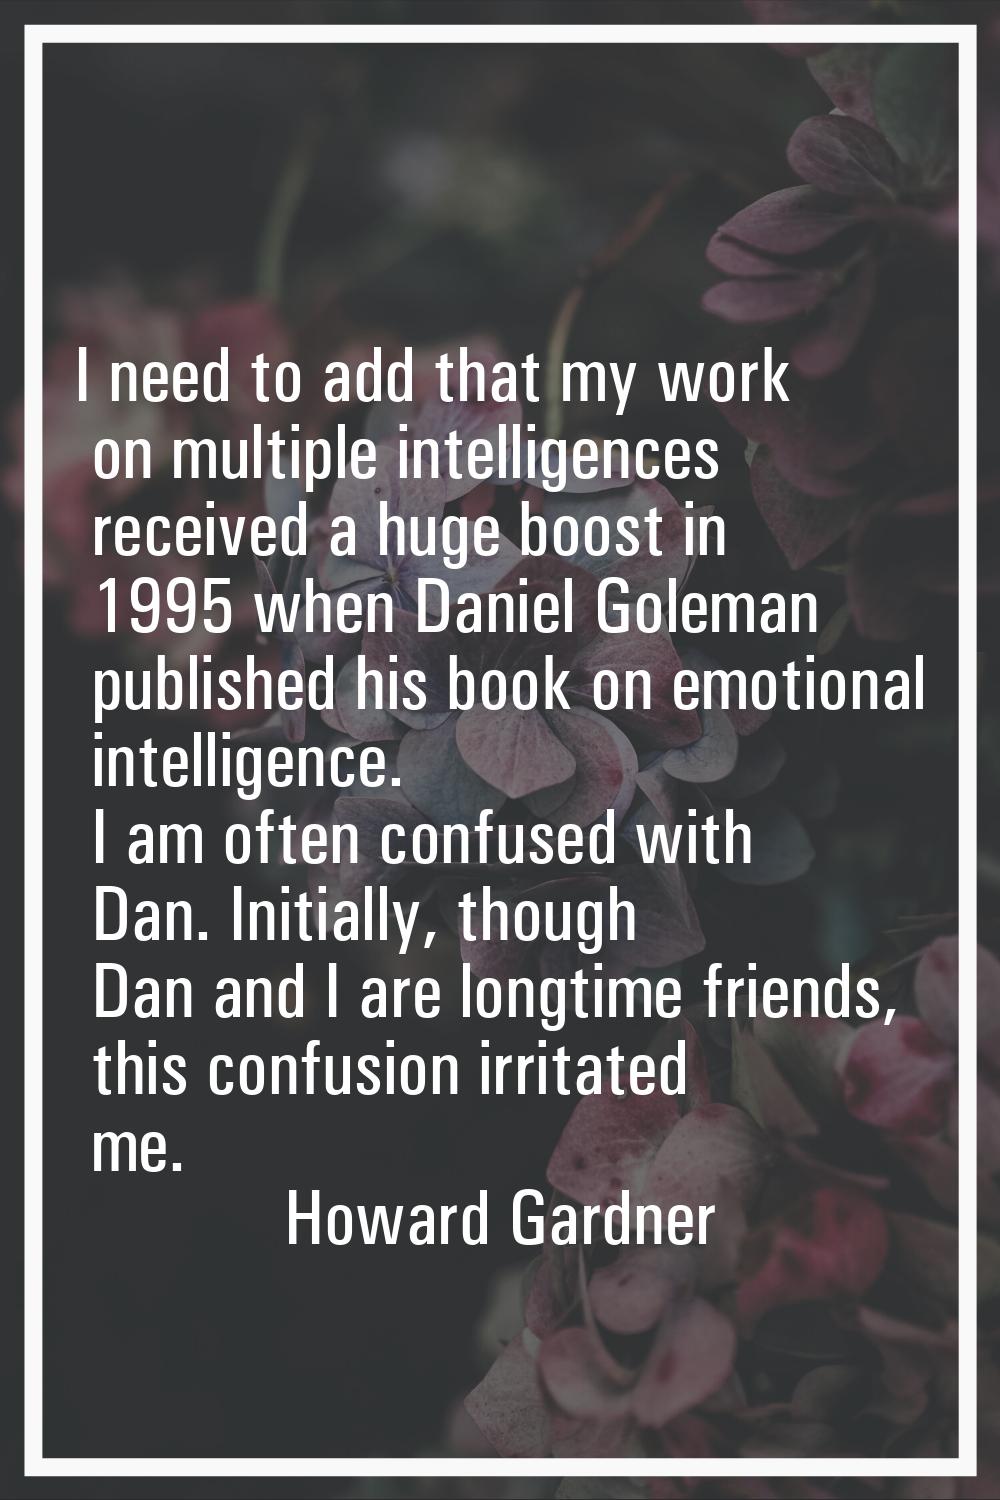 I need to add that my work on multiple intelligences received a huge boost in 1995 when Daniel Gole